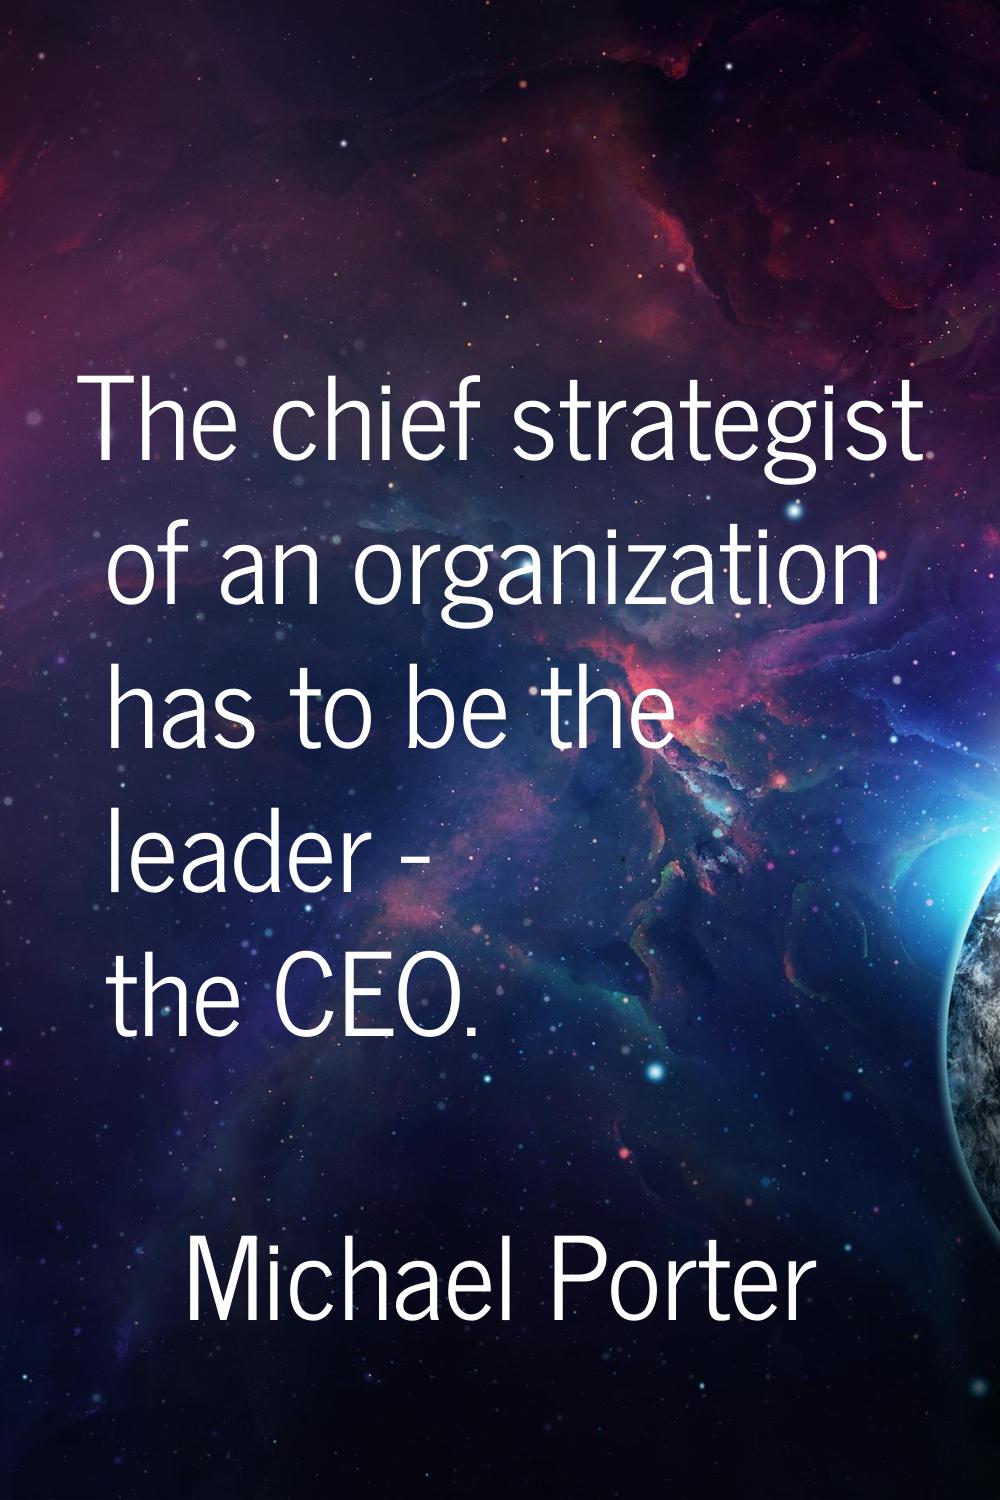 The chief strategist of an organization has to be the leader - the CEO.